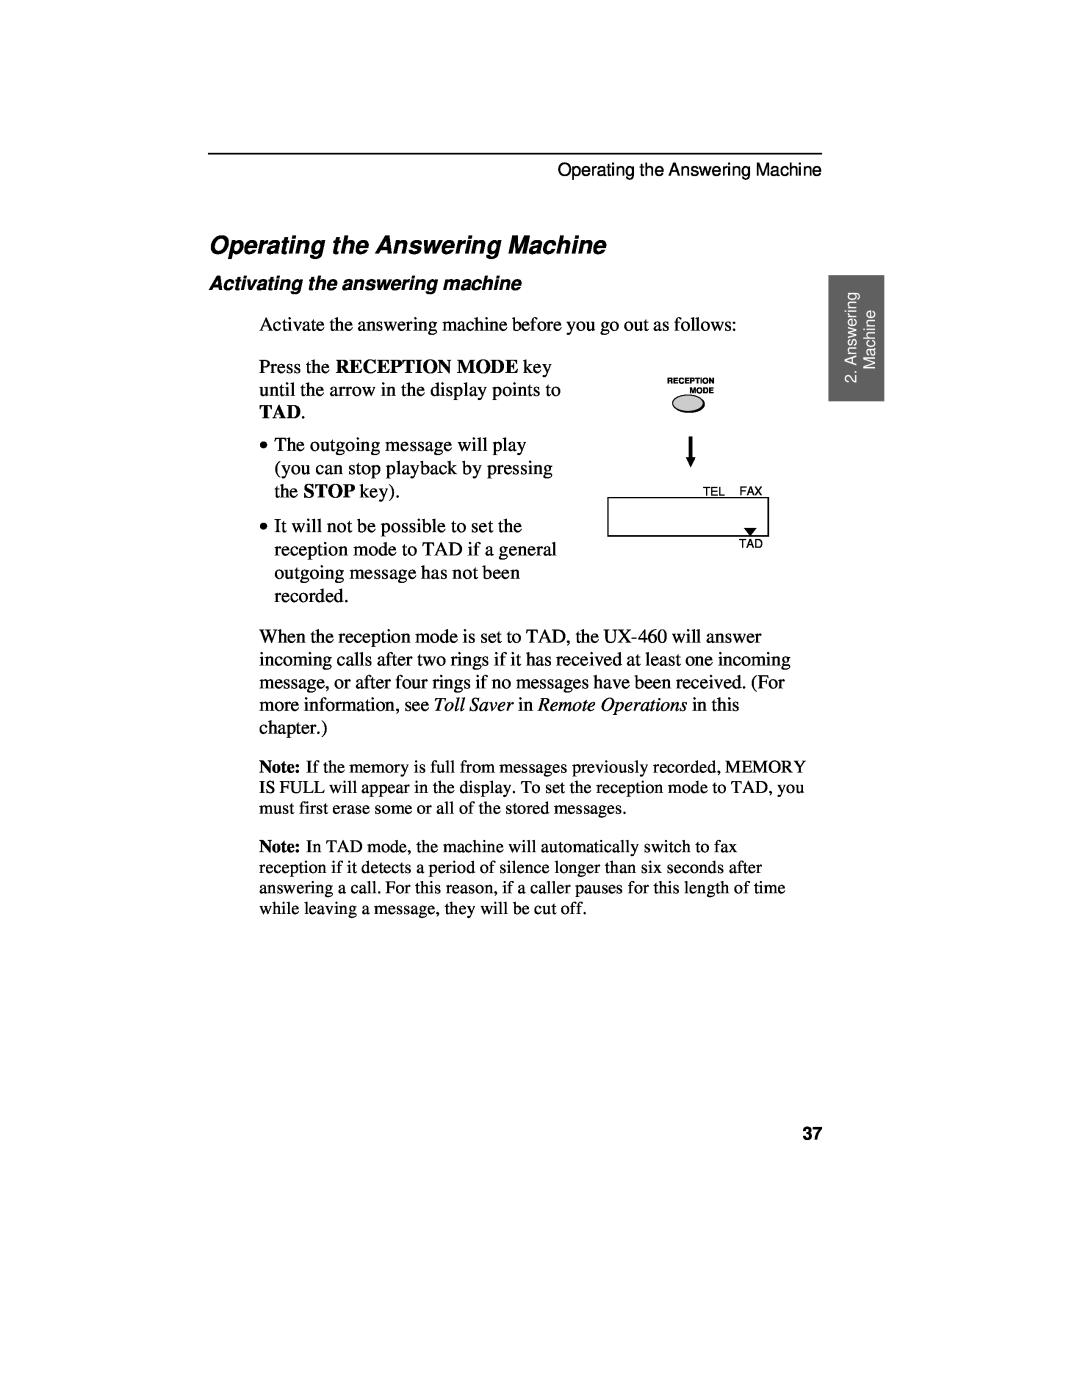 Sharp UX-460 operation manual Operating the Answering Machine, Activating the answering machine 